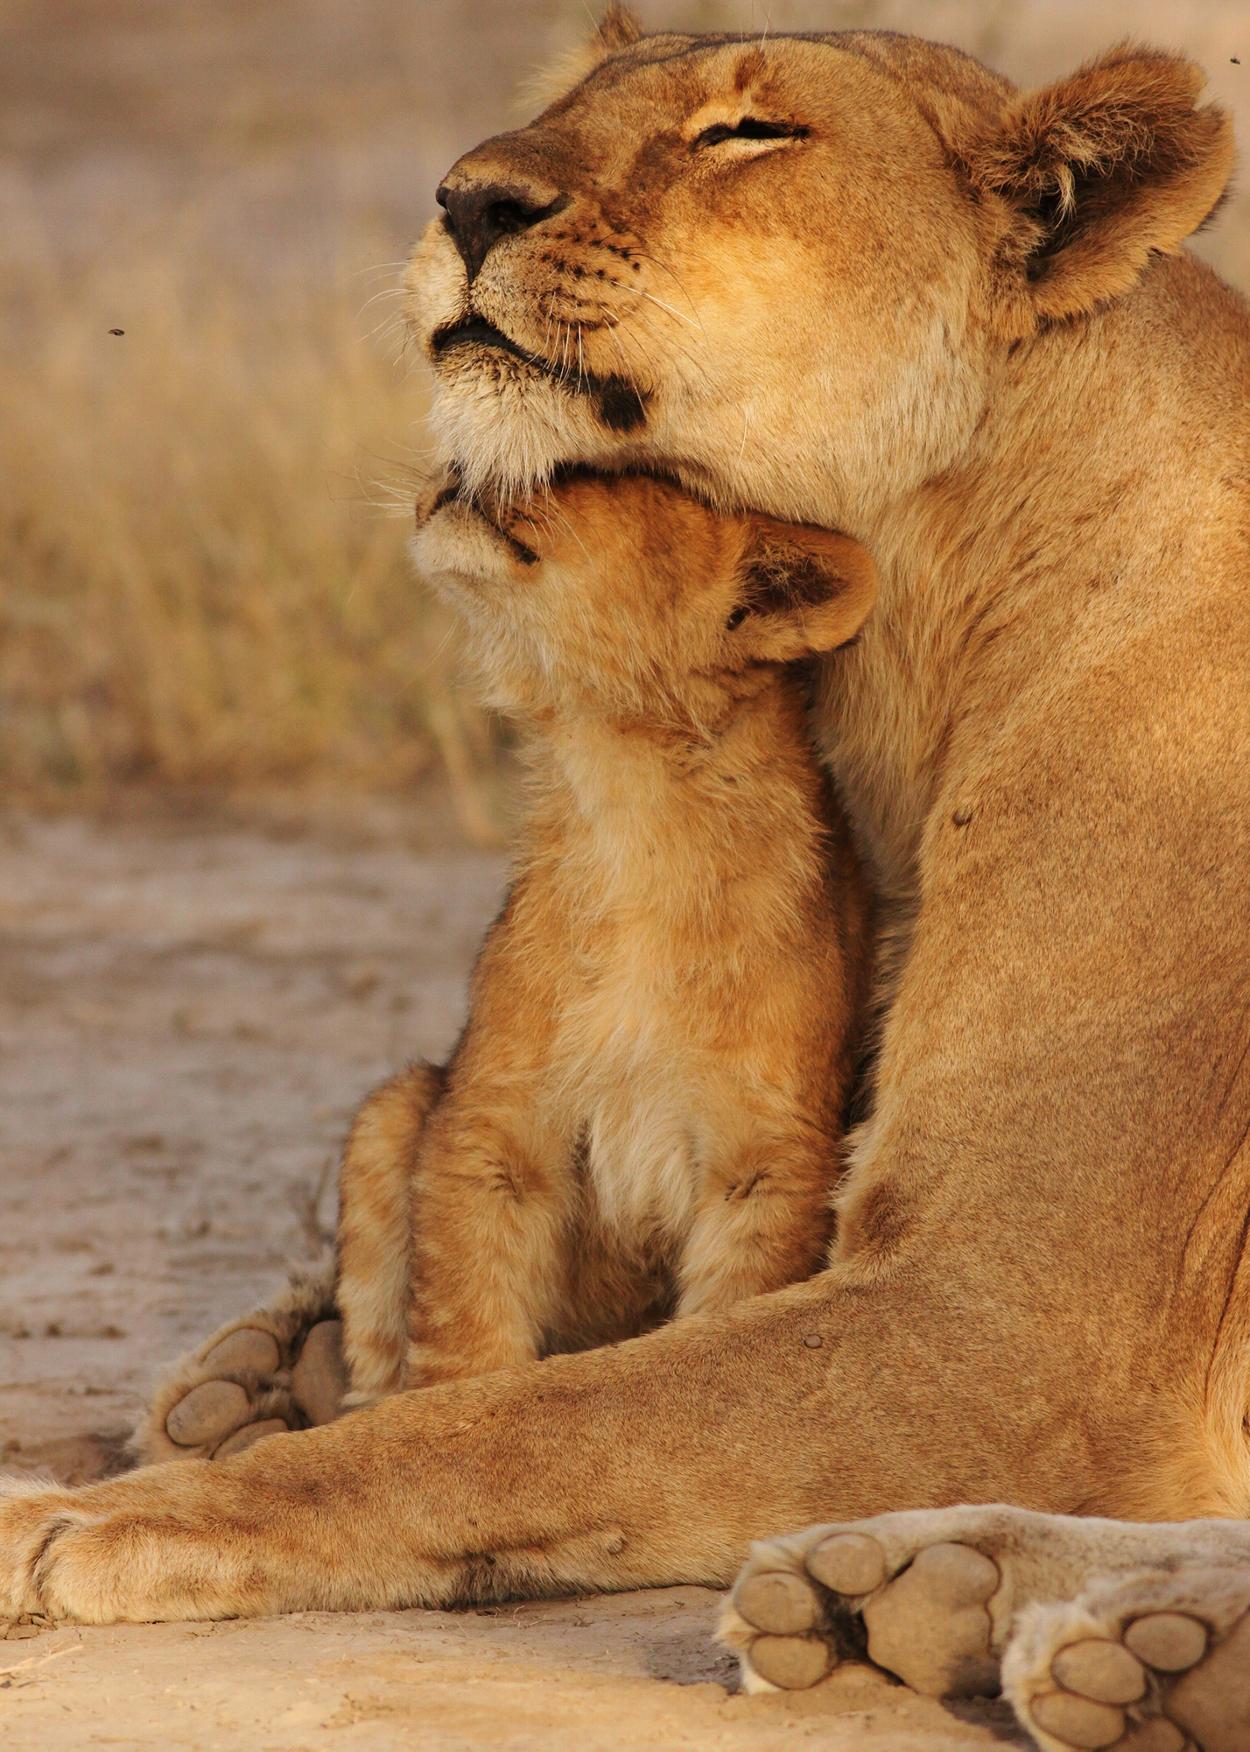 Lioness with cub in Southern Africa